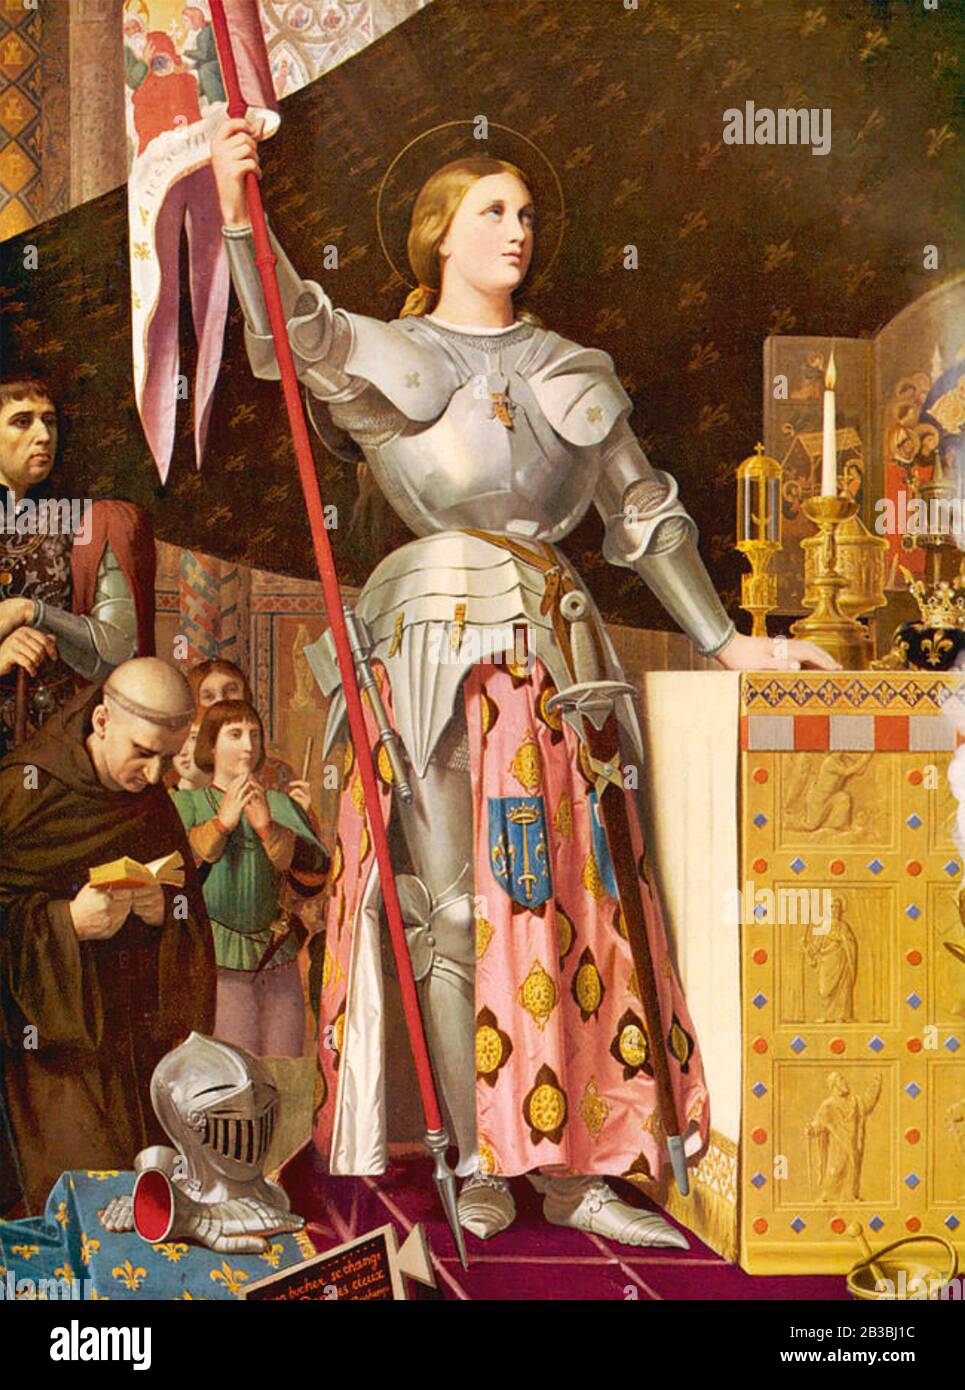 JOAN OF ARC ( c 1412-1431) French military heroine as imagined in a 19th century painting. Stock Photo